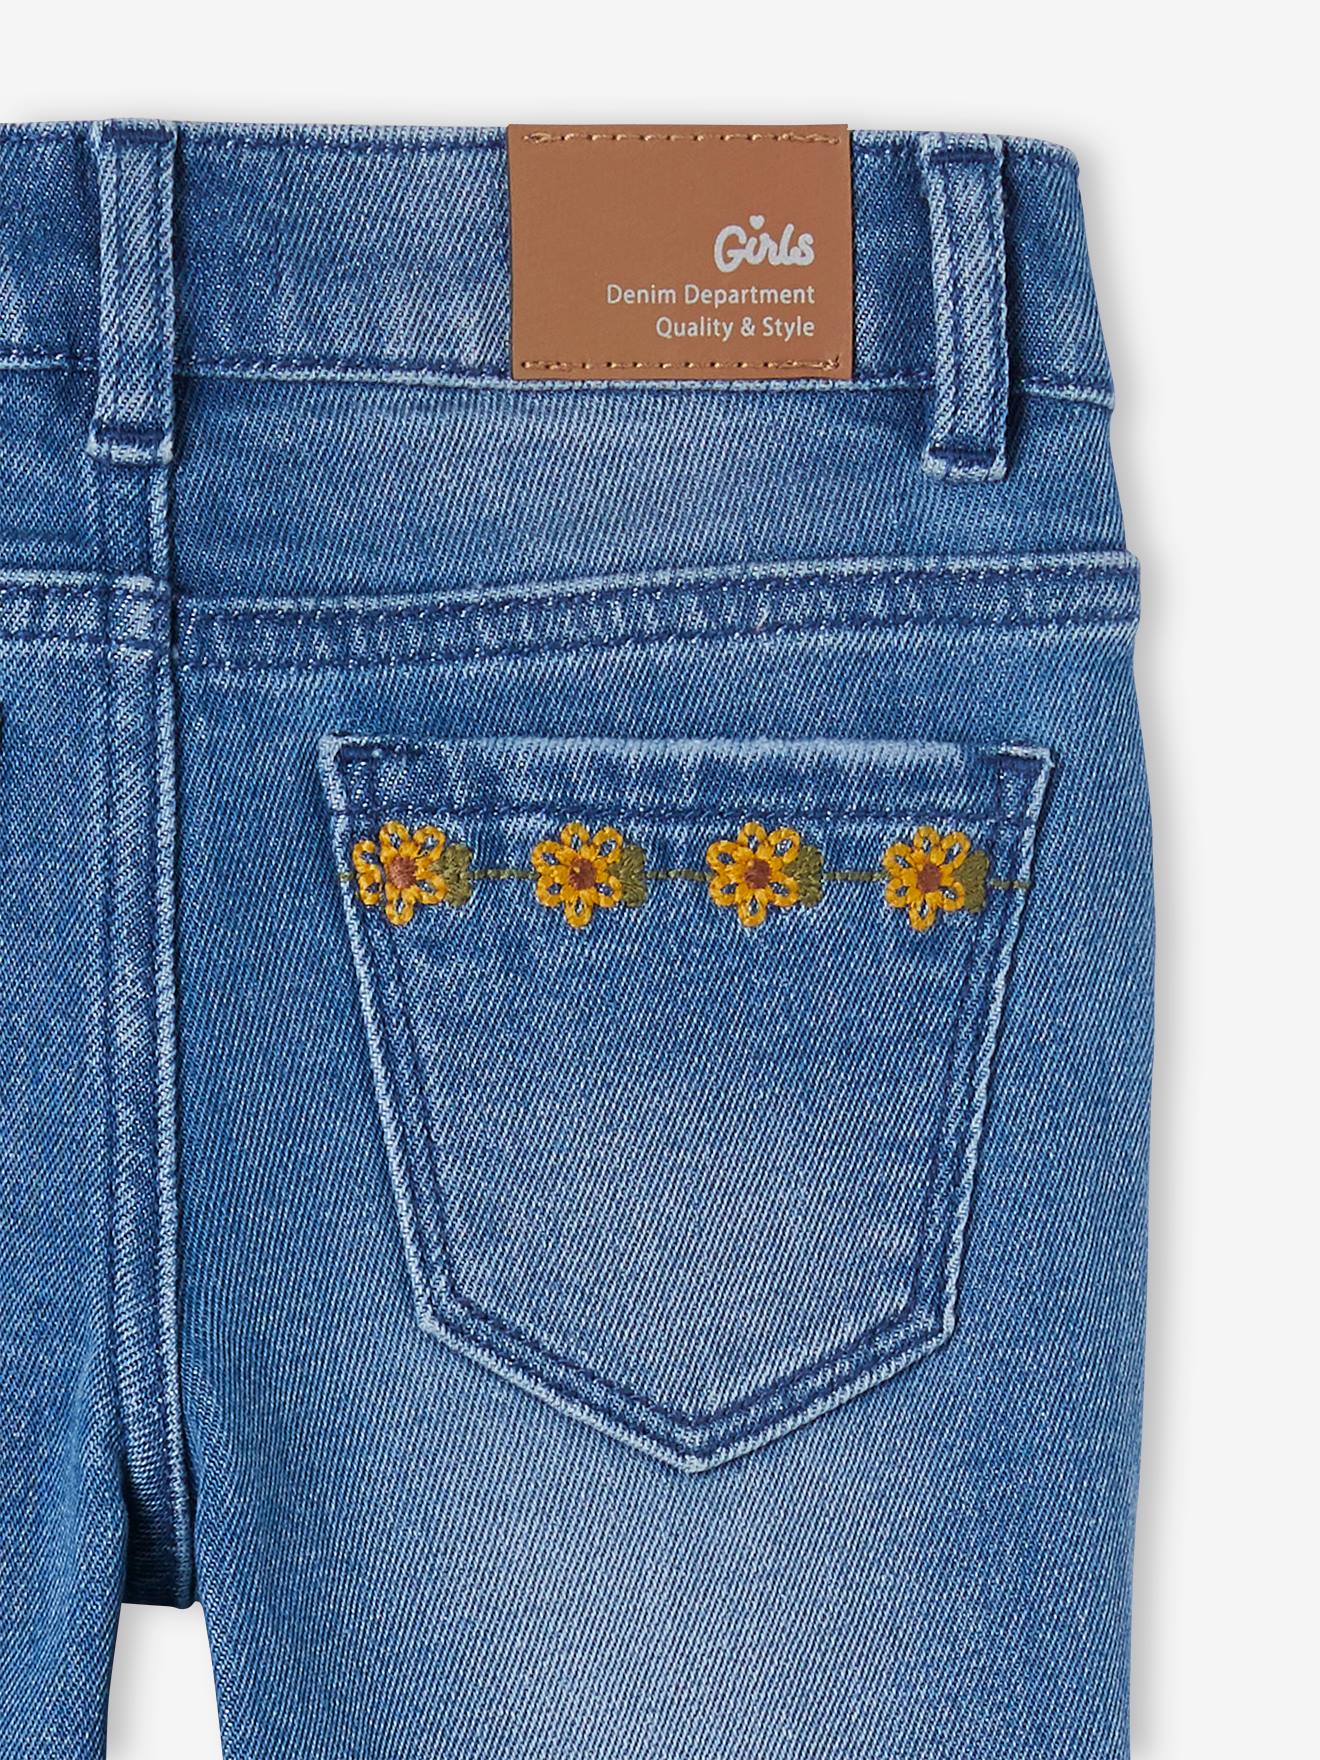 ohyeahrock Vintage Embroidered Floral Jeans, Blue Embroidered Denim Pants, Handmade Boho Jeans, Summer Cropped Pants, Soft Cotton Jeans, Gift for Her